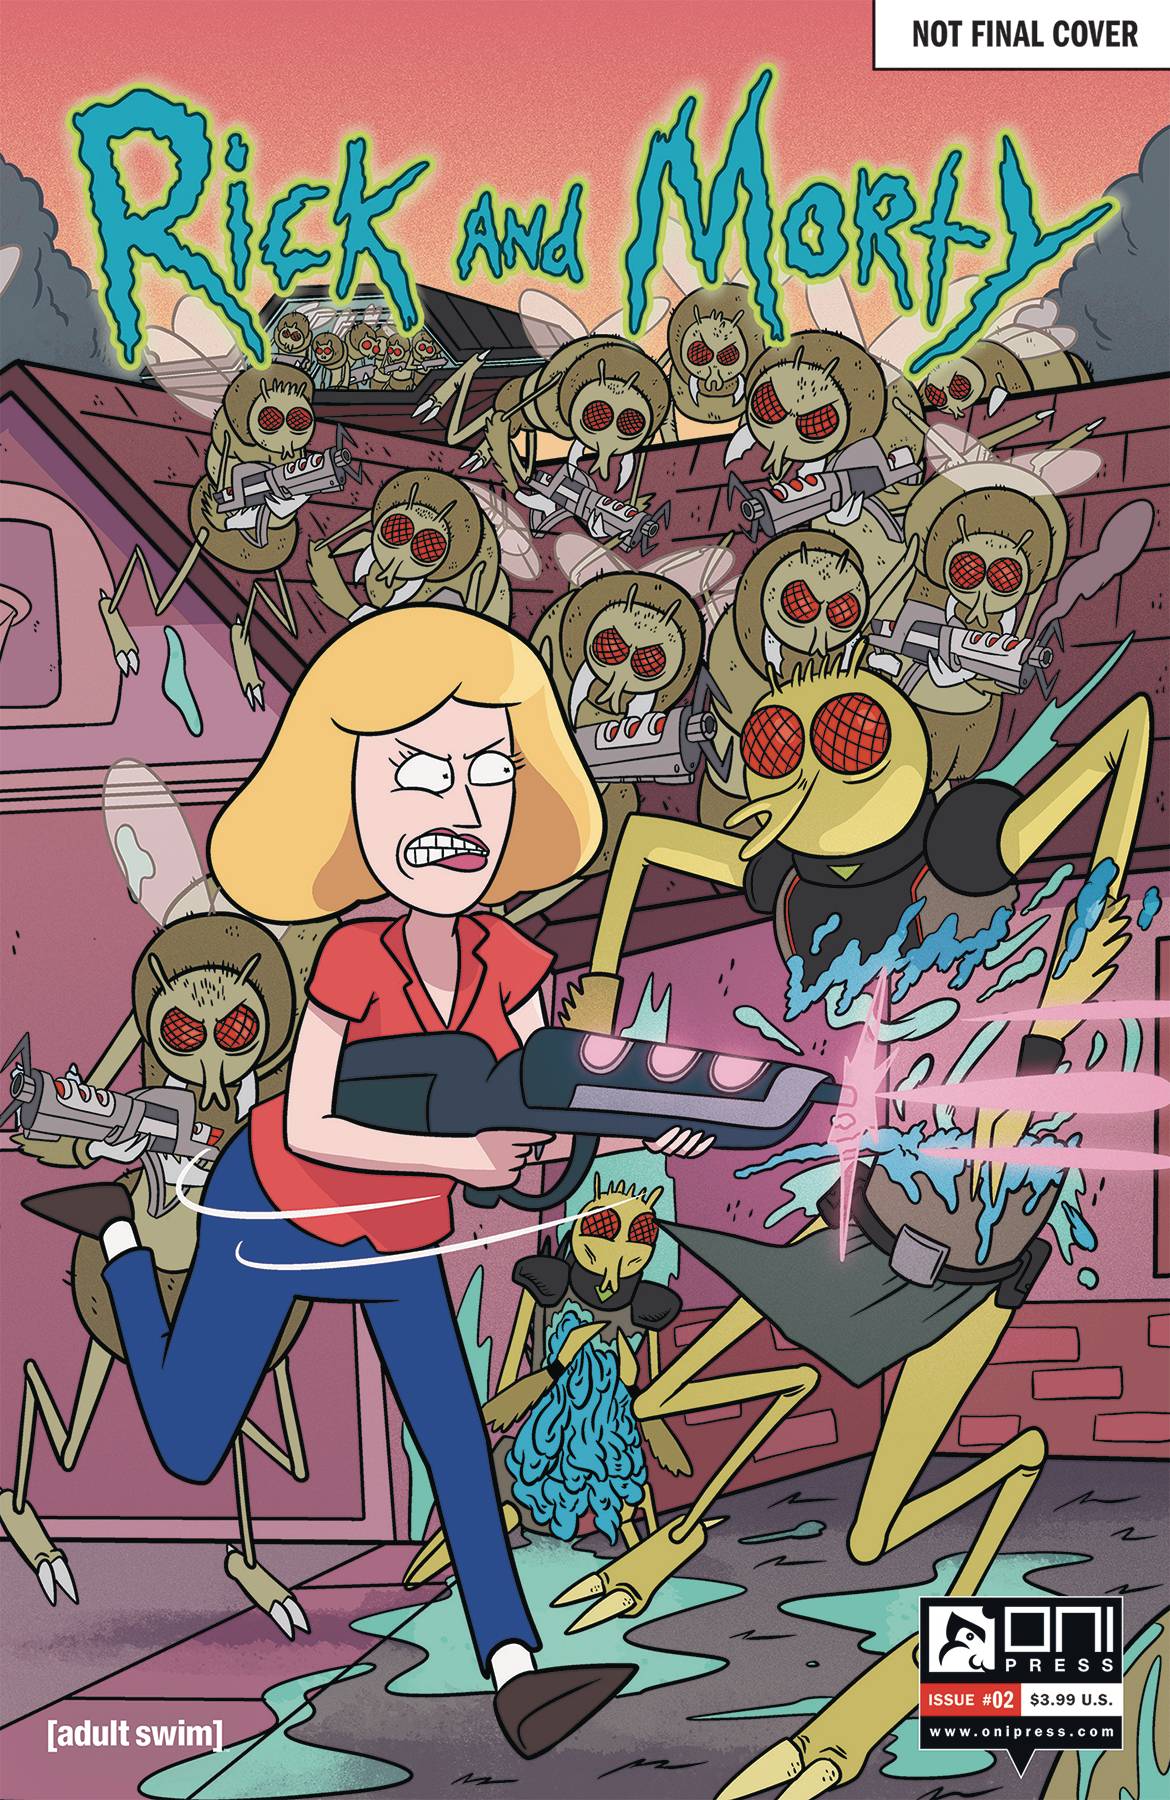 Rick and Morty #2 50 Issues Special Variant (2015)